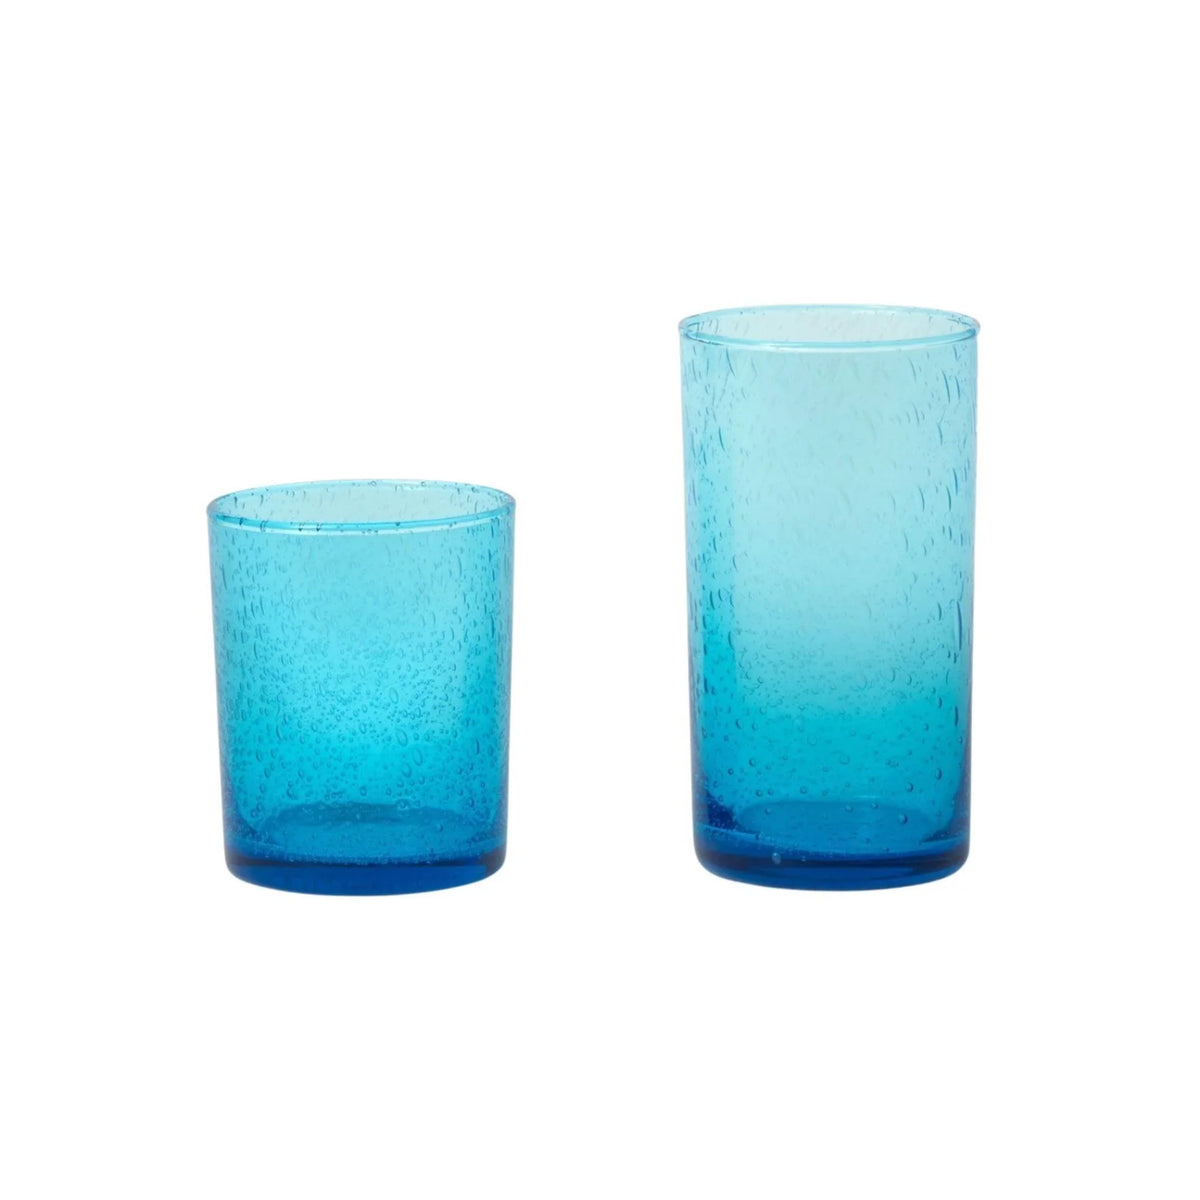 http://www.wellappointedhouse.com/cdn/shop/files/hand-blown-bubble-glass-design-glasses-in-sky-blue-drinkware-the-well-appointed-house-1_70274d11-7b9a-496d-bcfc-1c14ea505b19_1200x1200.webp?v=1691670582